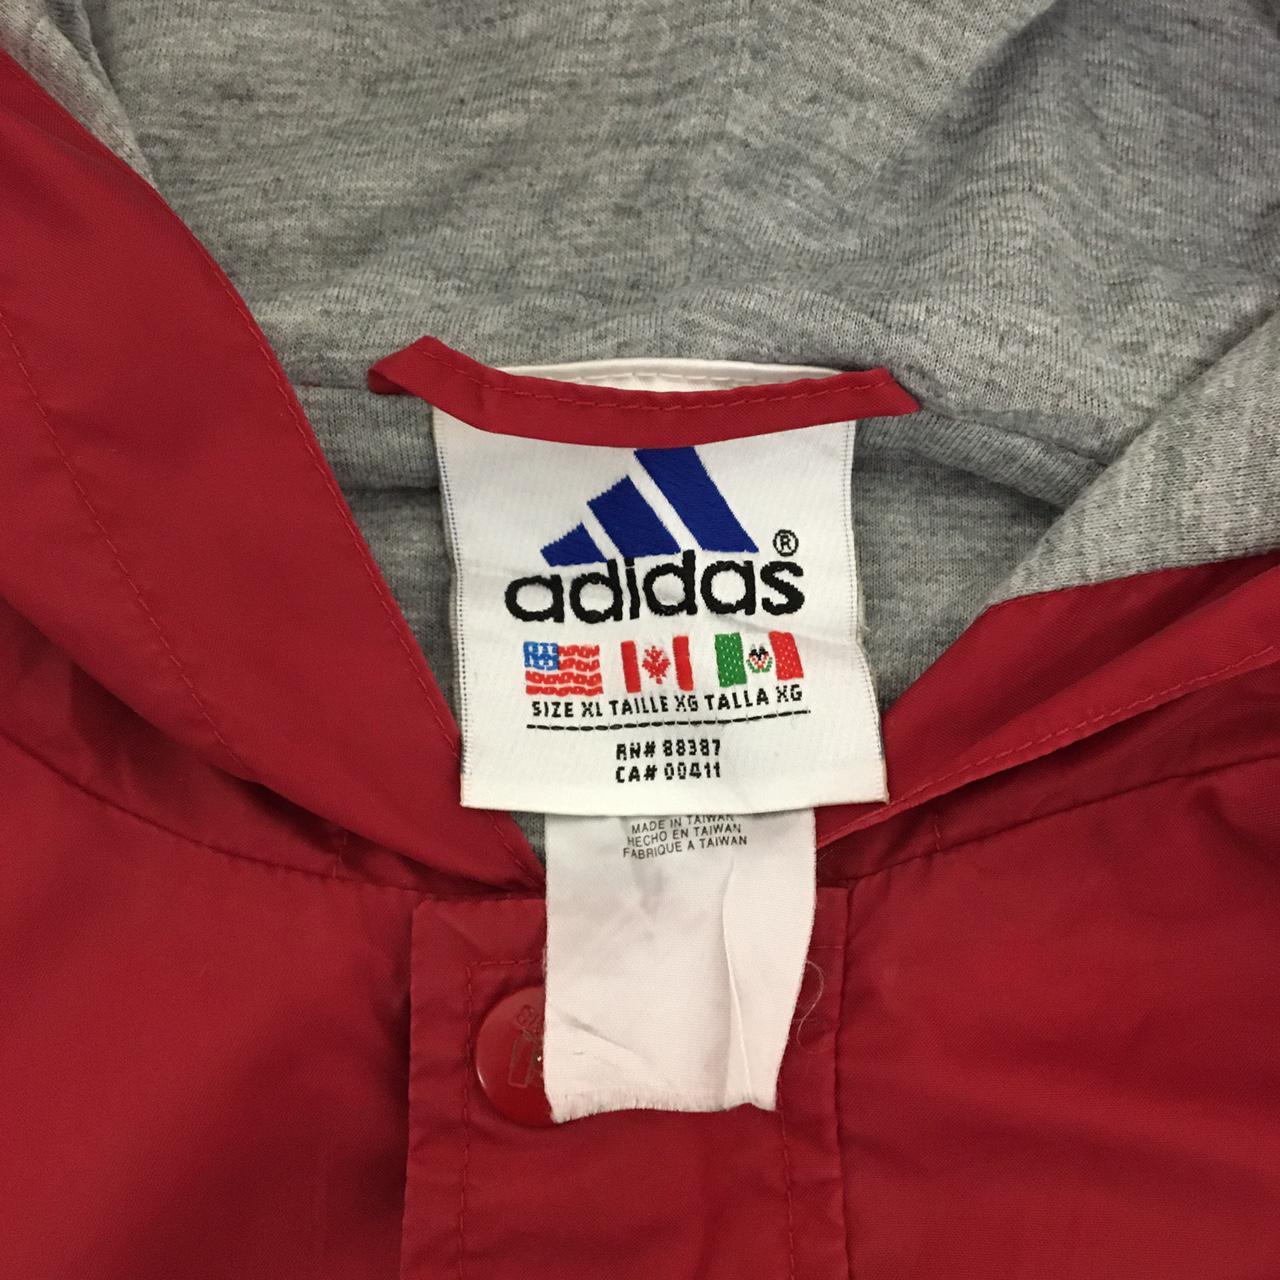 Vintage Adidas jacket in XL. All our items are... - Depop